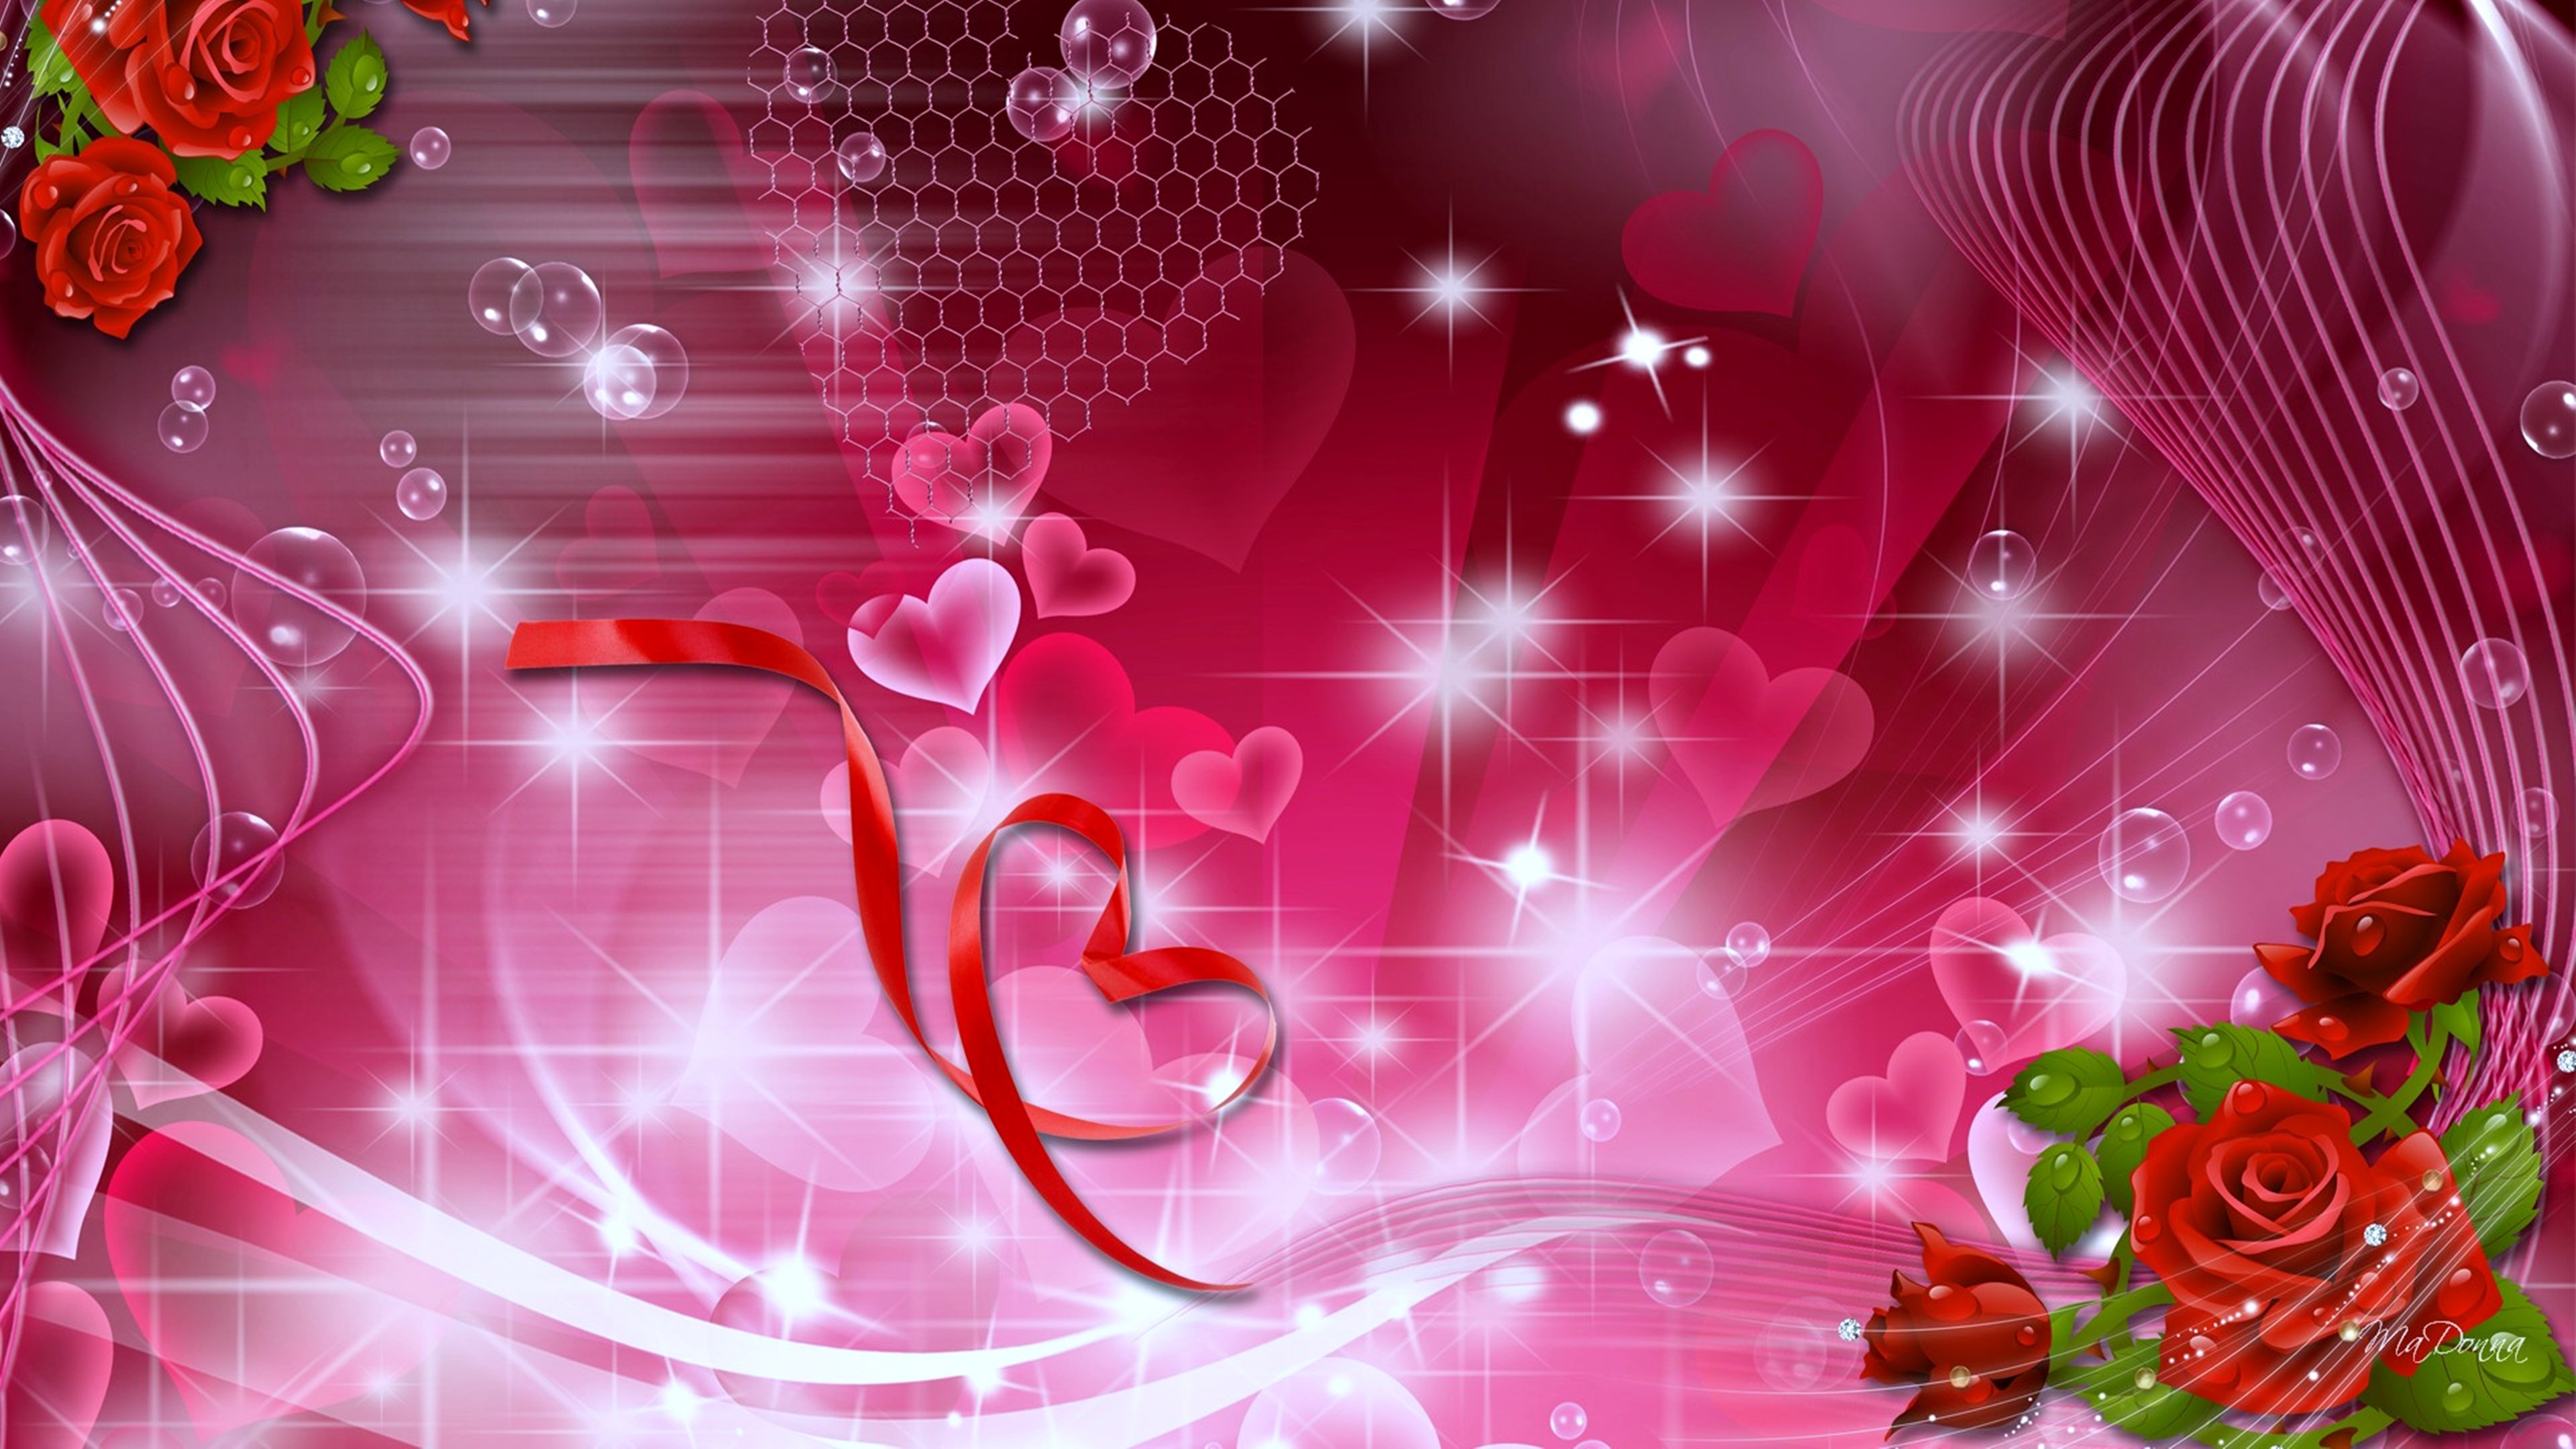 flowers, Roses, Hearts, Stars, Love, Gift, Magical, Wallpapers, Romantice Wallpaper